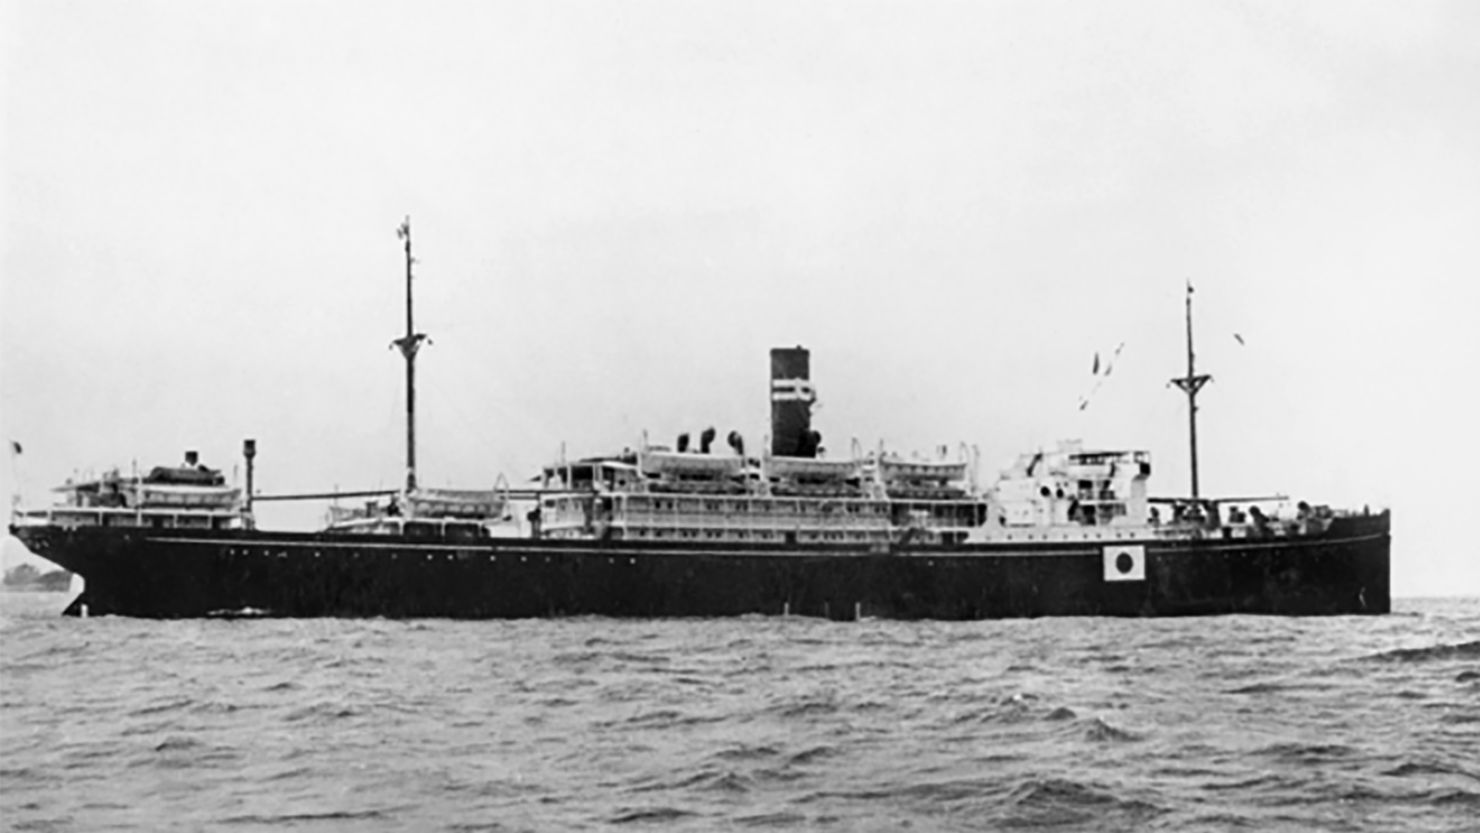 A starboard side view of the Japanese passenger ship Montevideo Maru, which sank in 1942 after being torpedoed by a US Navy submarine while carrying more than 1,000 prisoners.